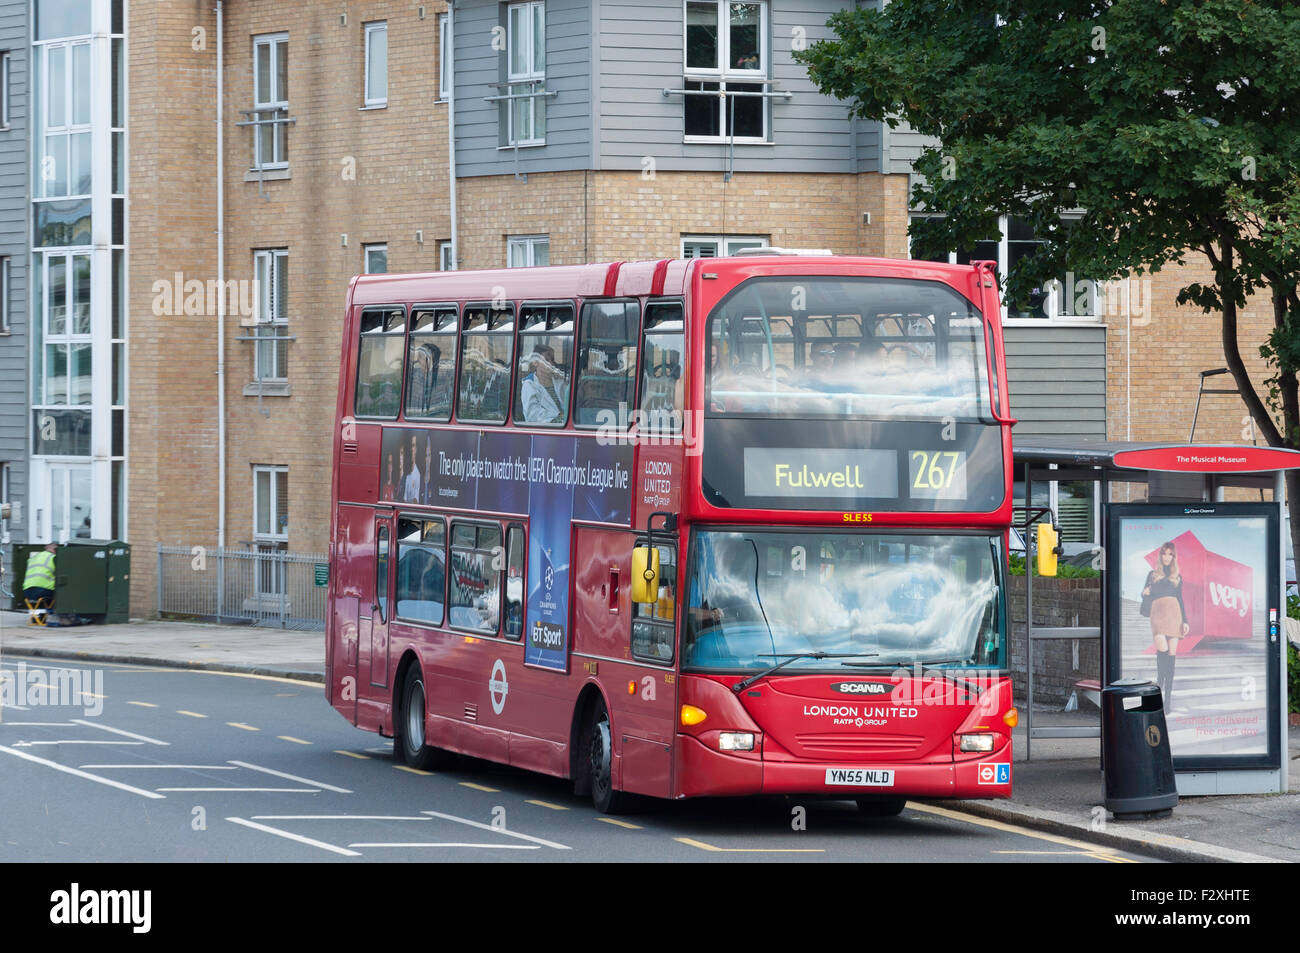 London double-decker bus at bus stop, High Street, Brentford, Borough of Hounslow Greater London, England, United Kingdom Stock Photo